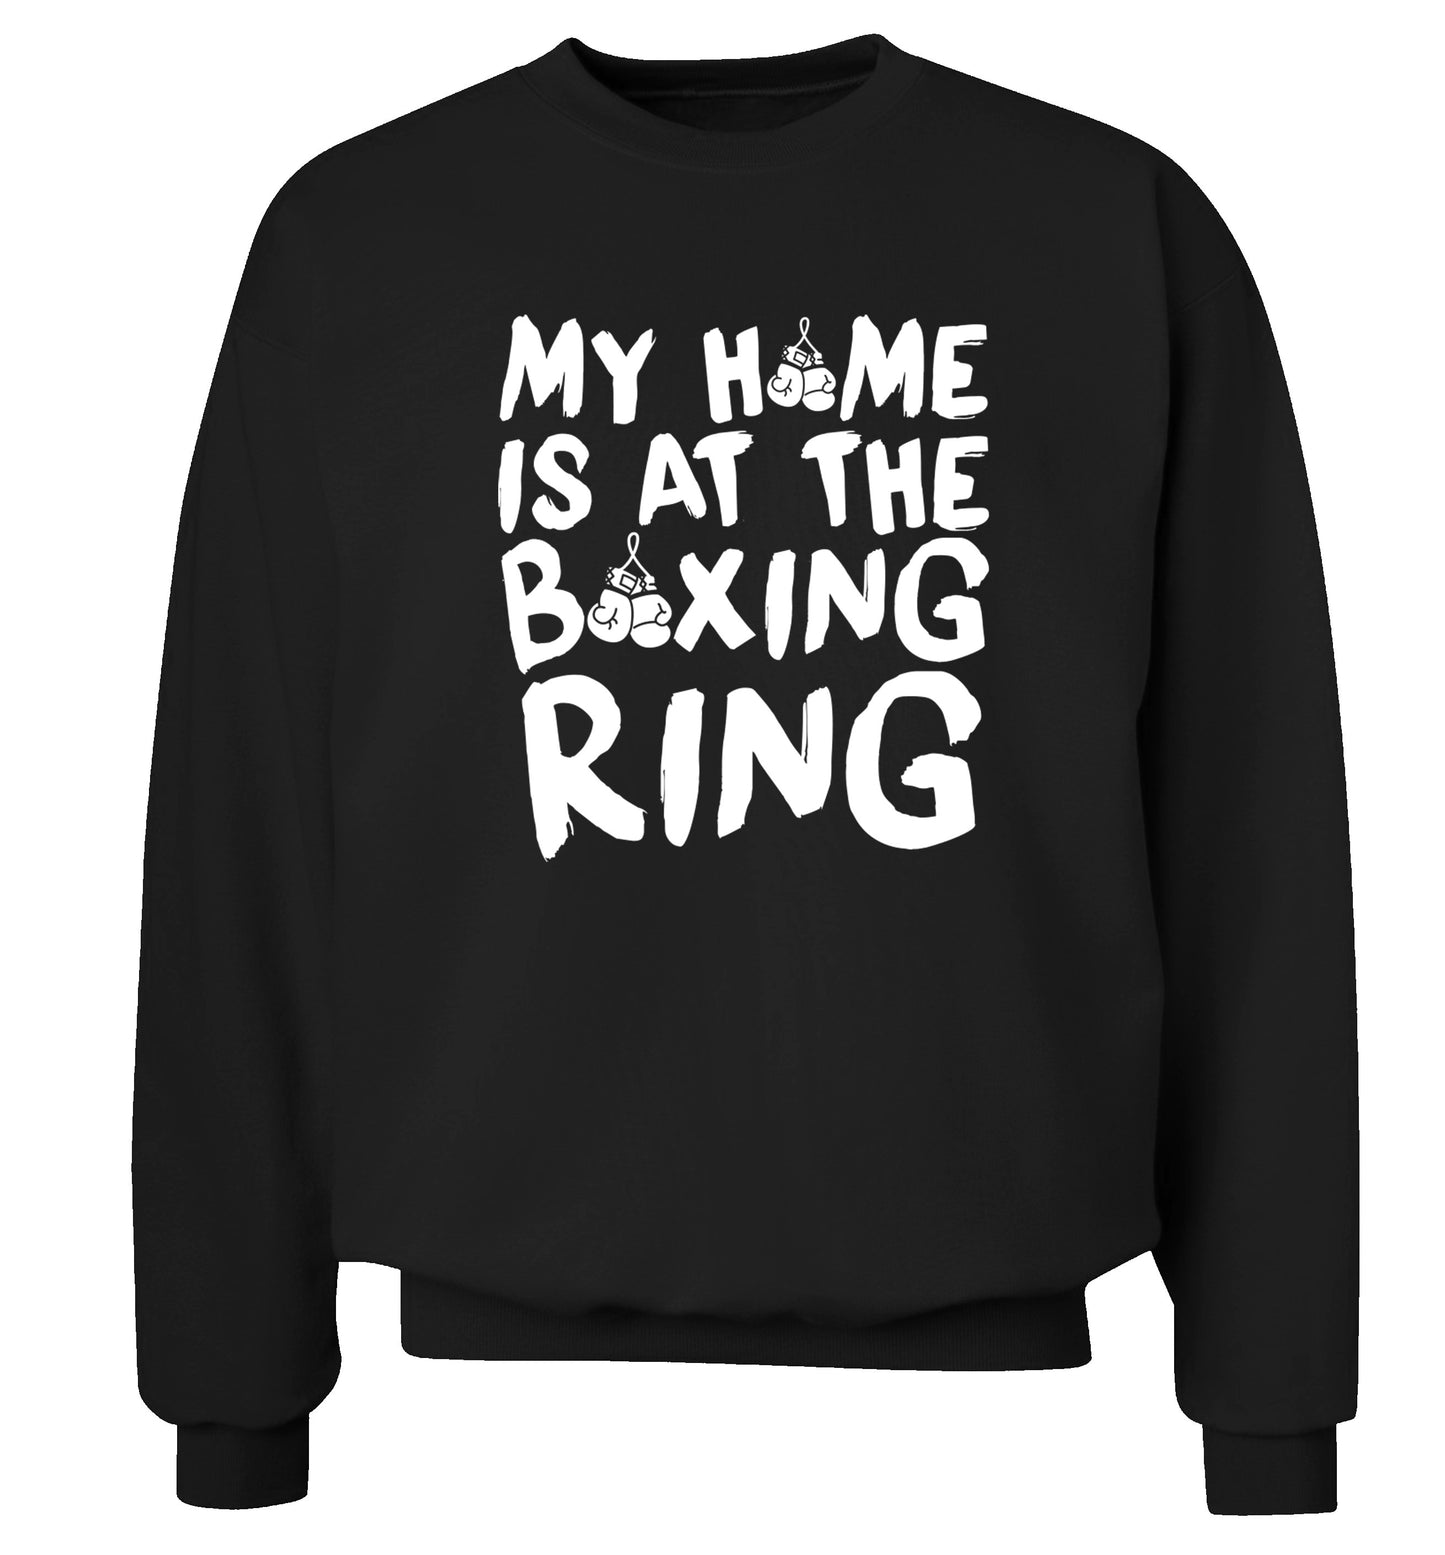 My home is at the boxing ring Adult's unisex black Sweater 2XL